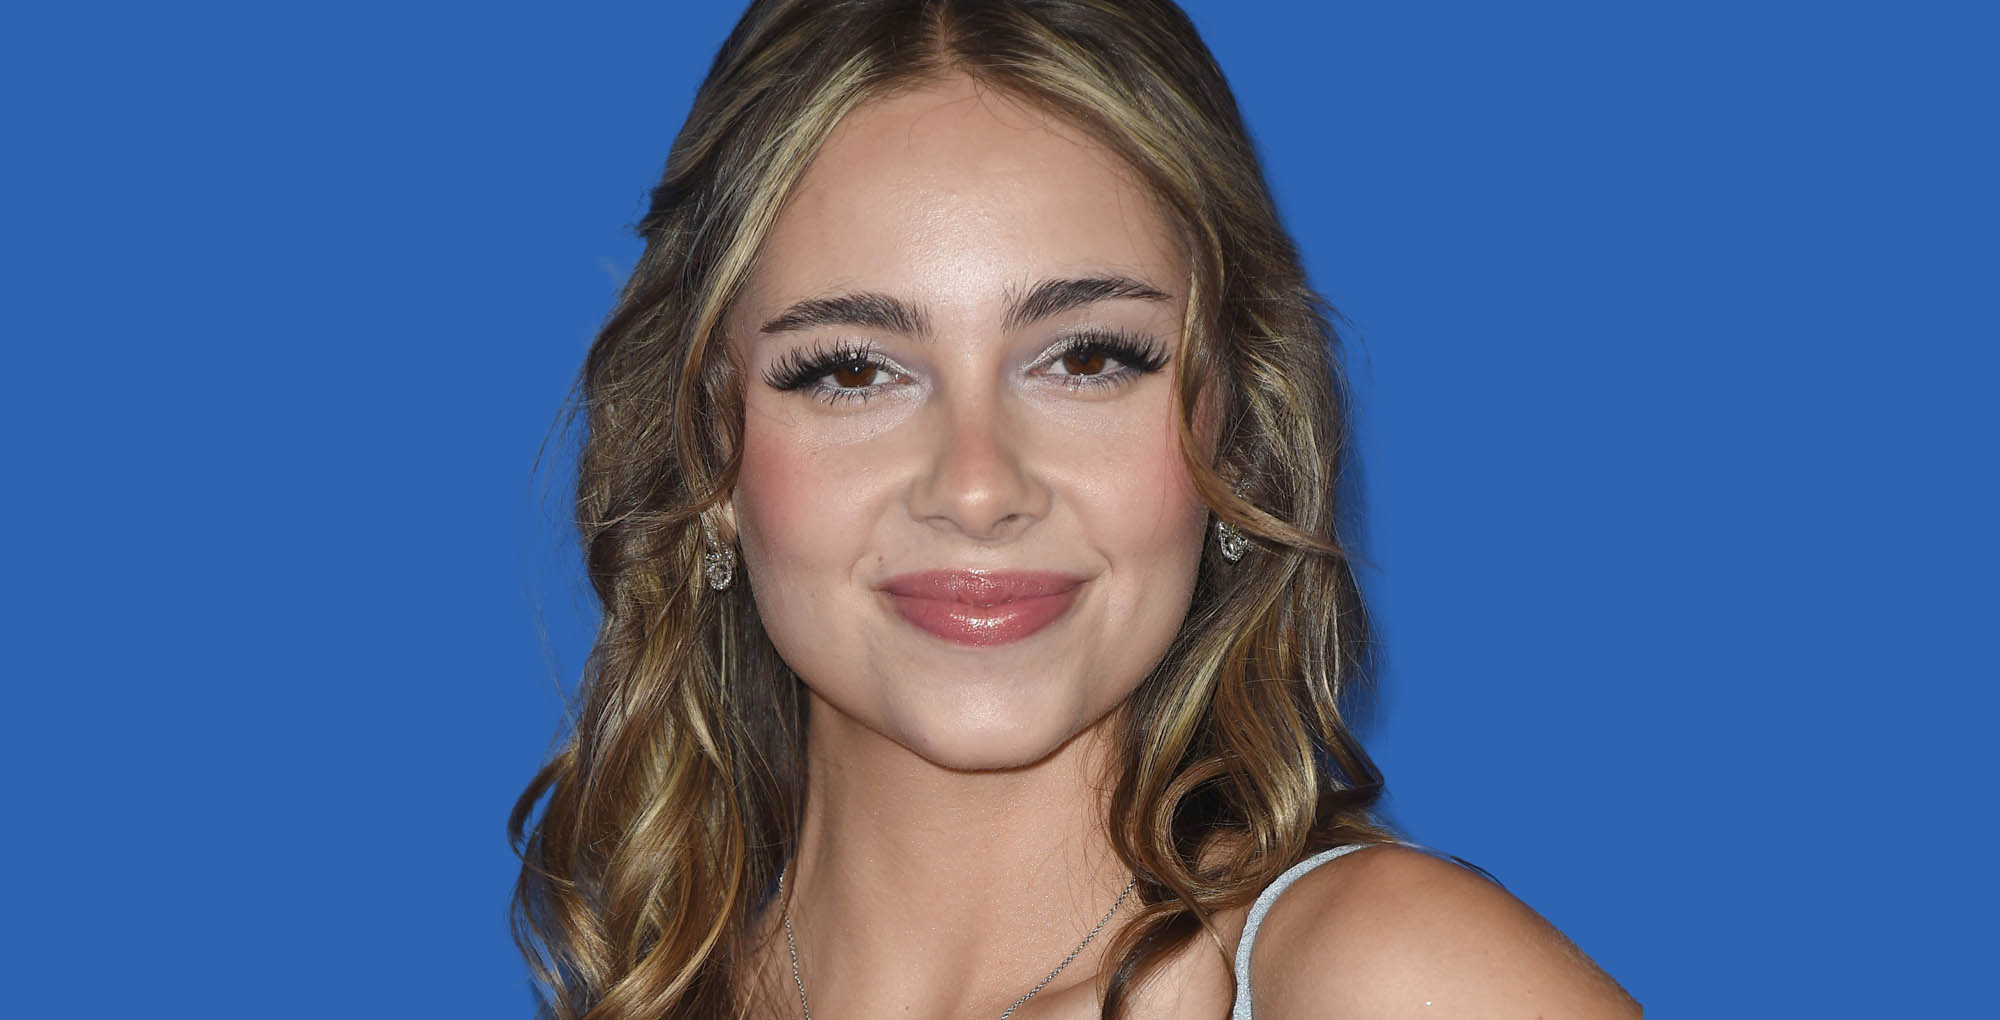 halley pullos from general hospital celebrates her birthday.